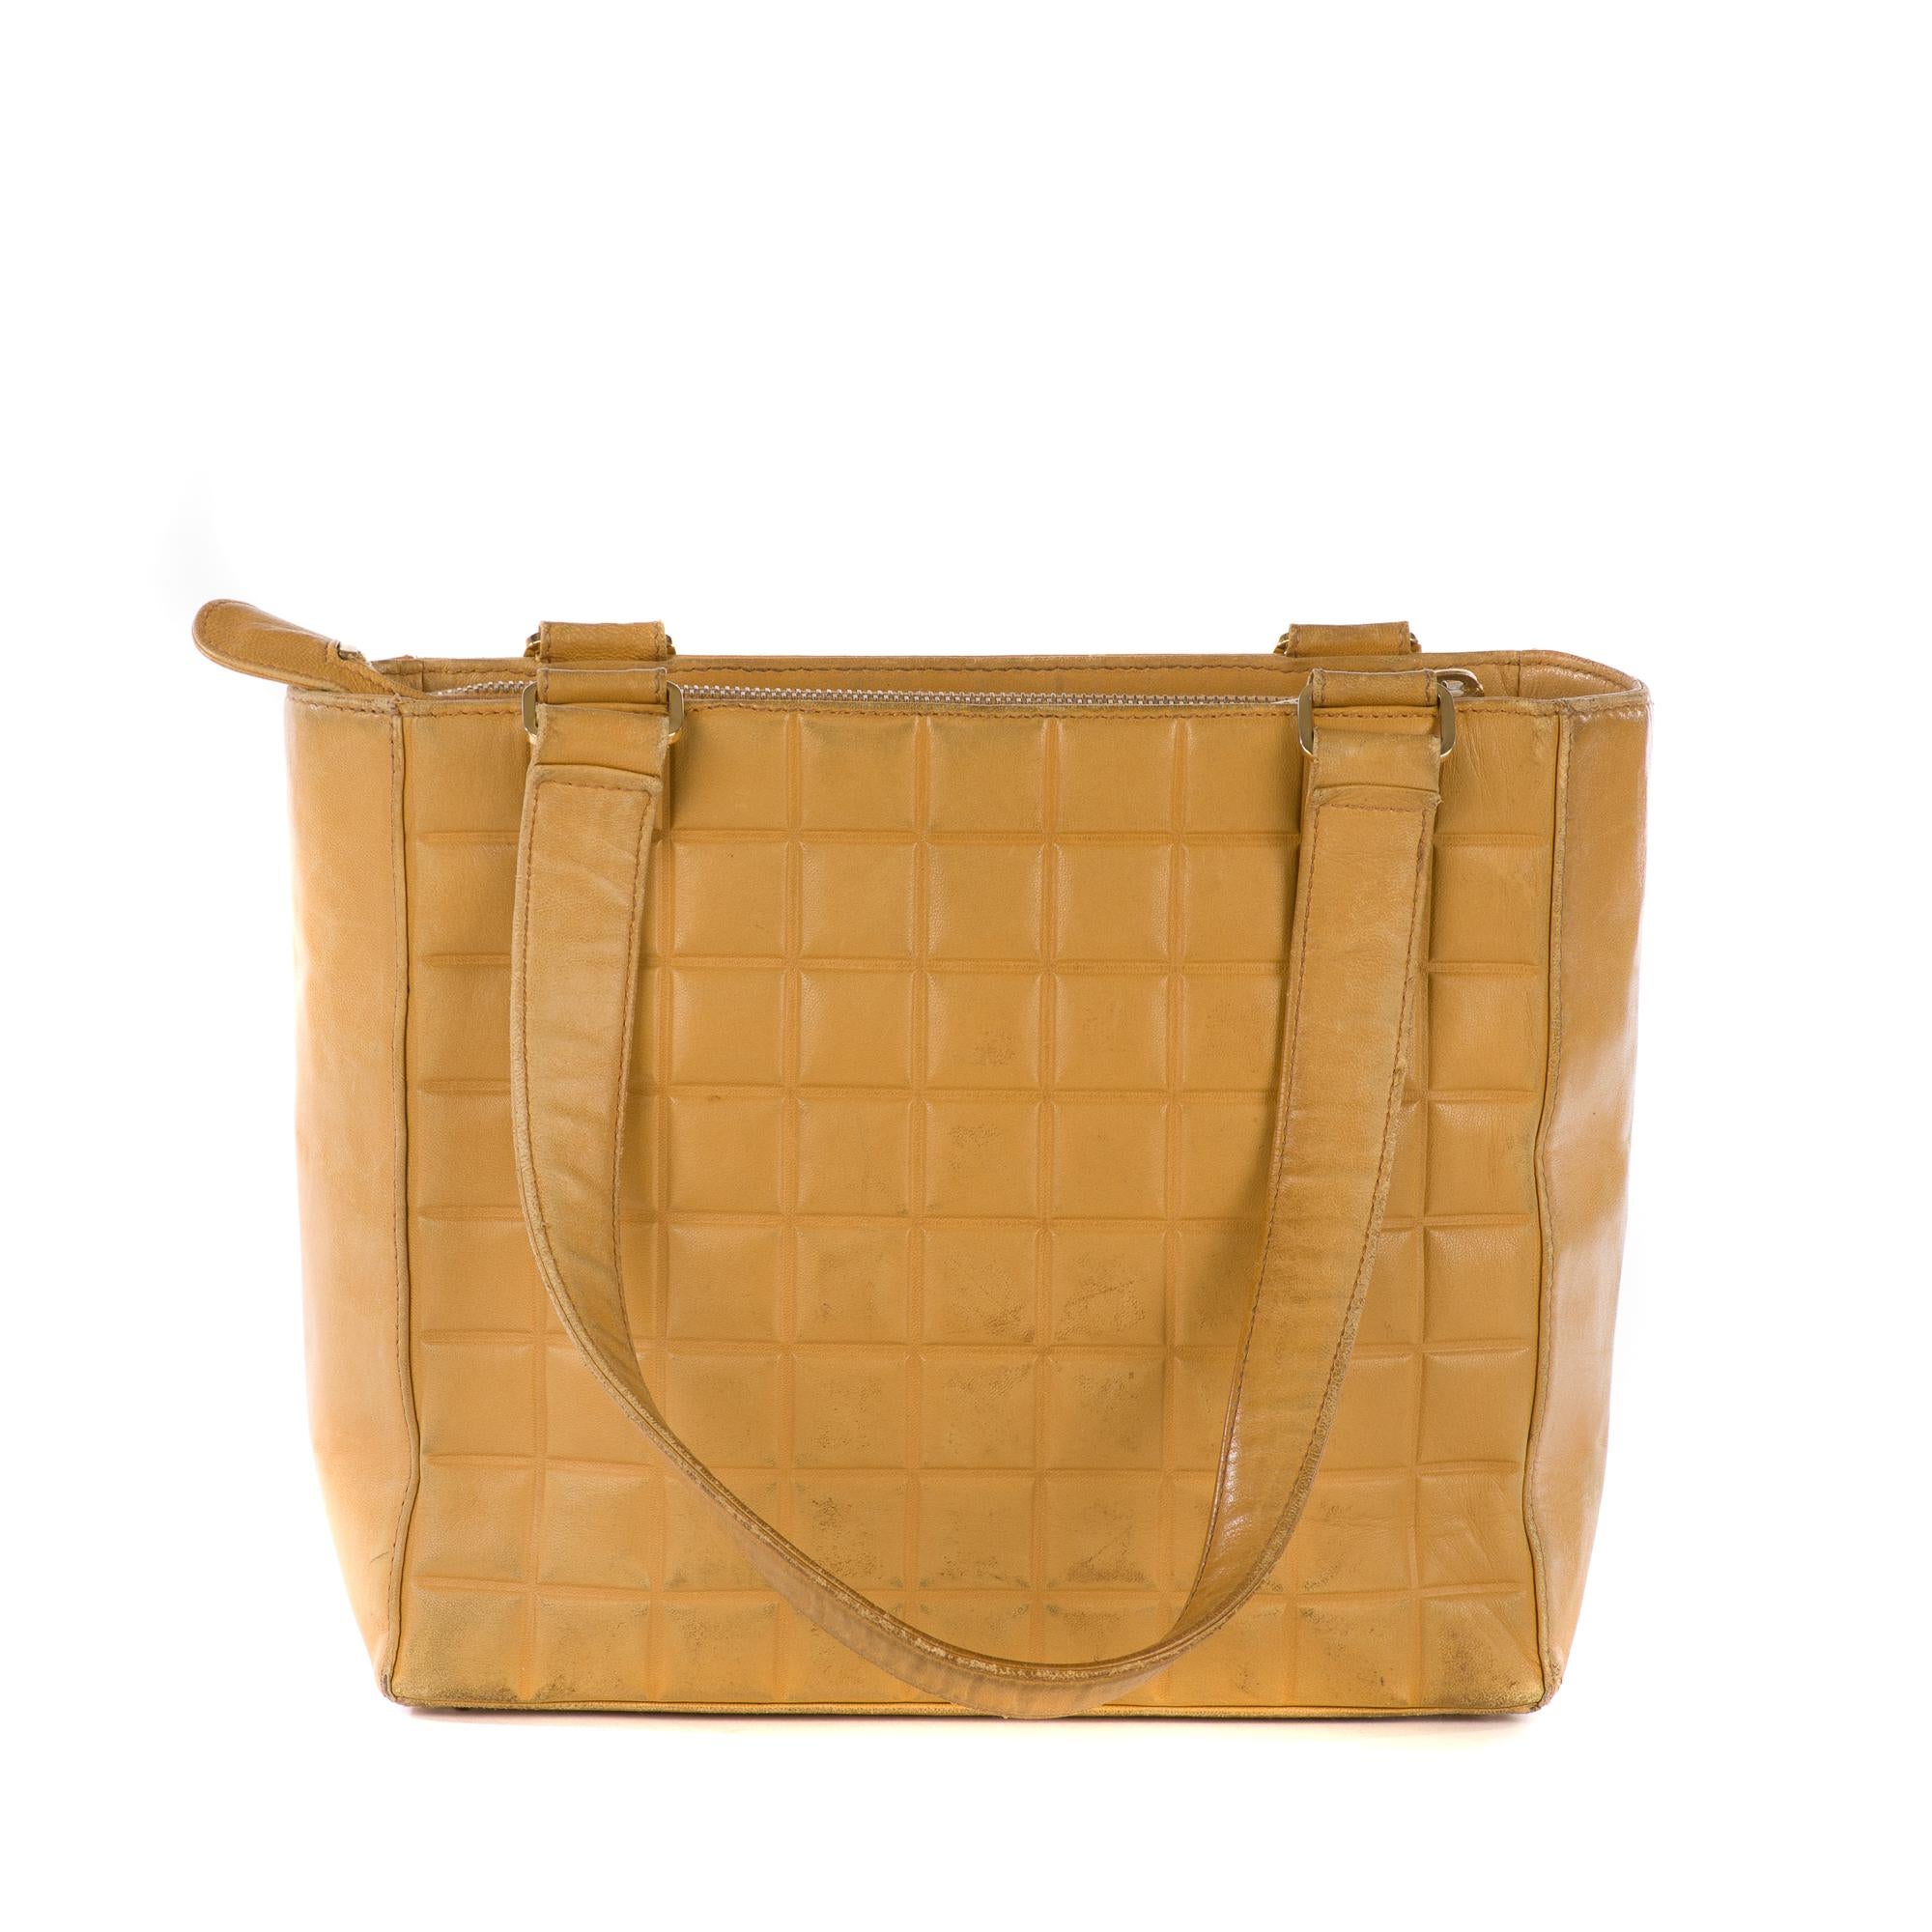 Classic handbag Chanel Medaillon - Bag in beige quilted lamb leather, gold hardware, beige leather double handle for hand or shoulder carry.

A zipper closure.
Beige leather lining, zipped pocket.
Signature: 